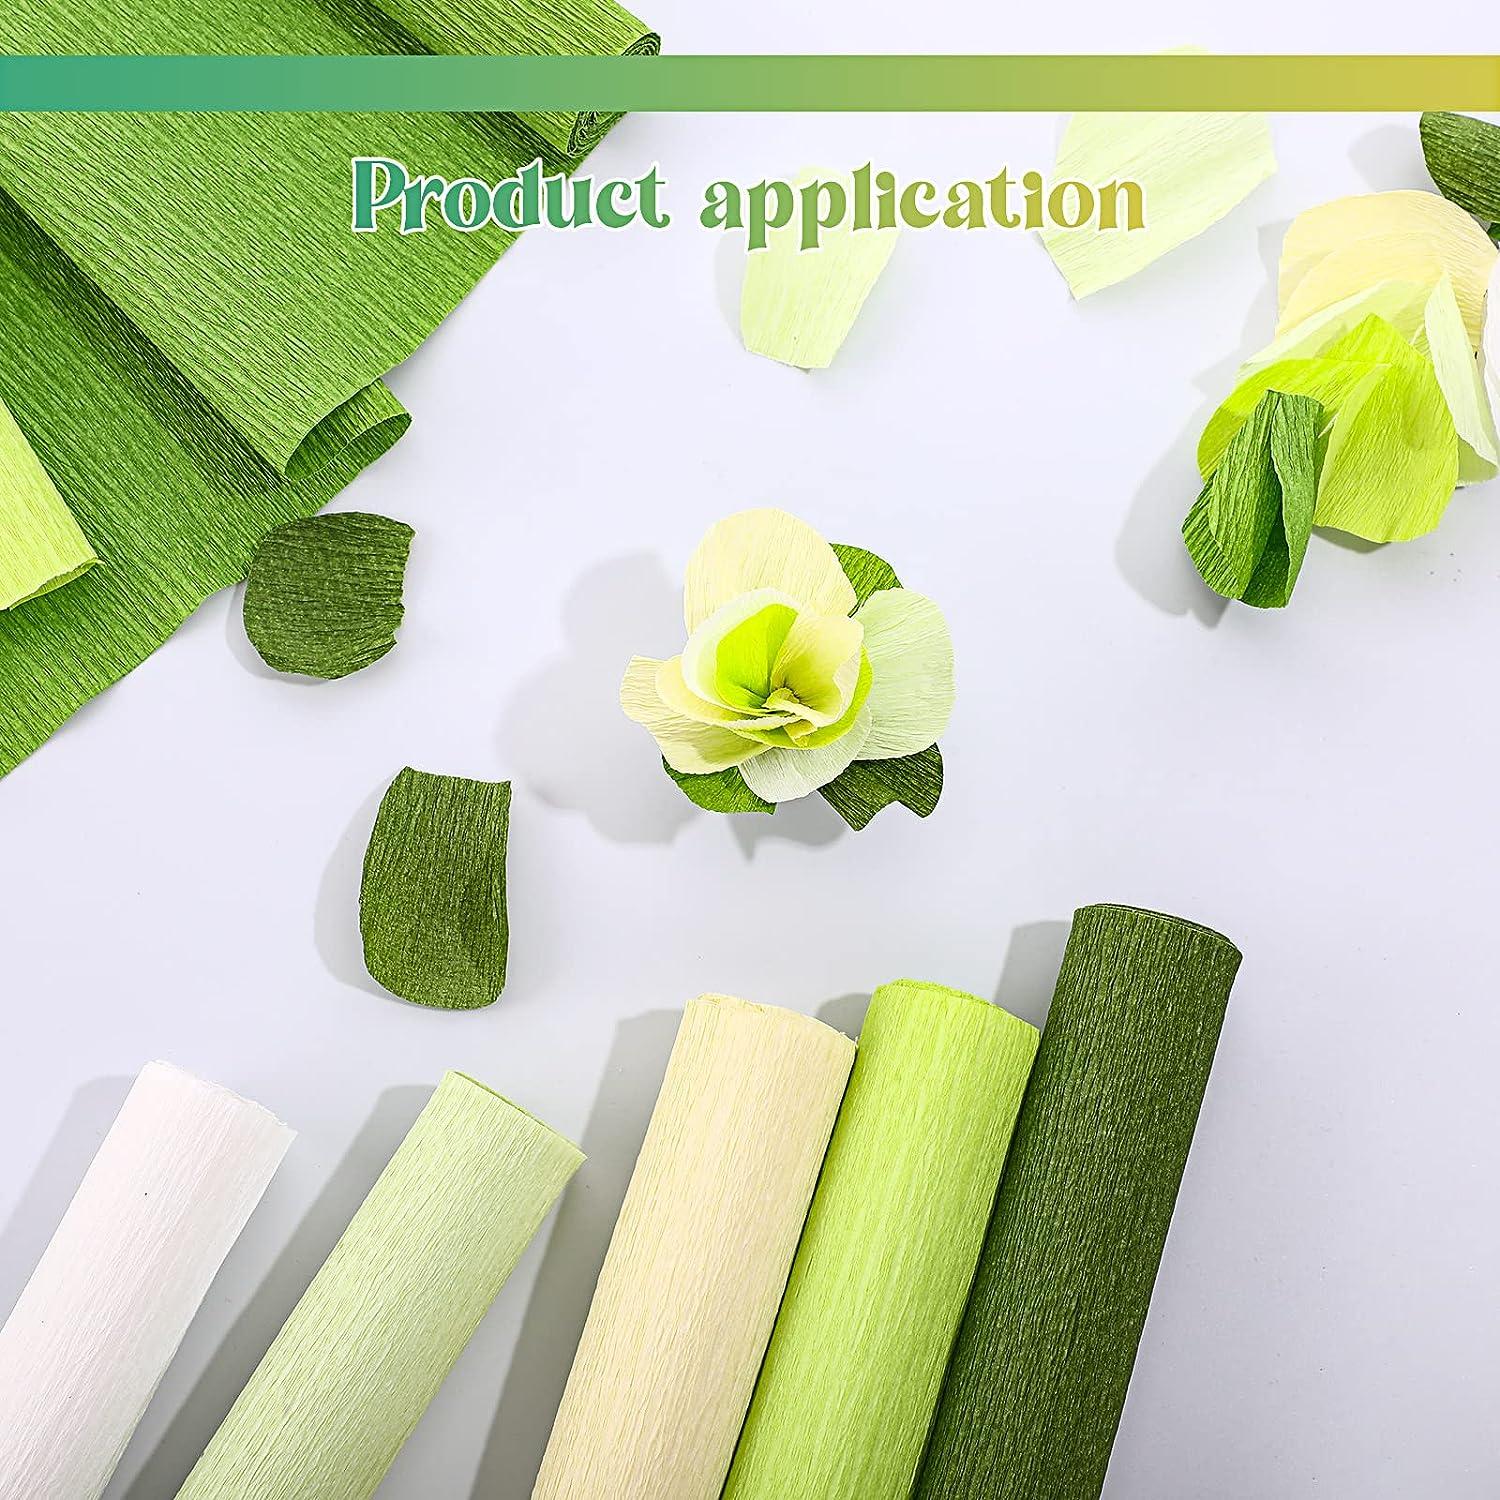 Crepe Paper Flower DIY Kit, 6pcs 35g Crepe Papel Rolls with Green Floral  Tape and 50pcs Floral Iron Wires for Crafting Wedding Birthday Party  Festival